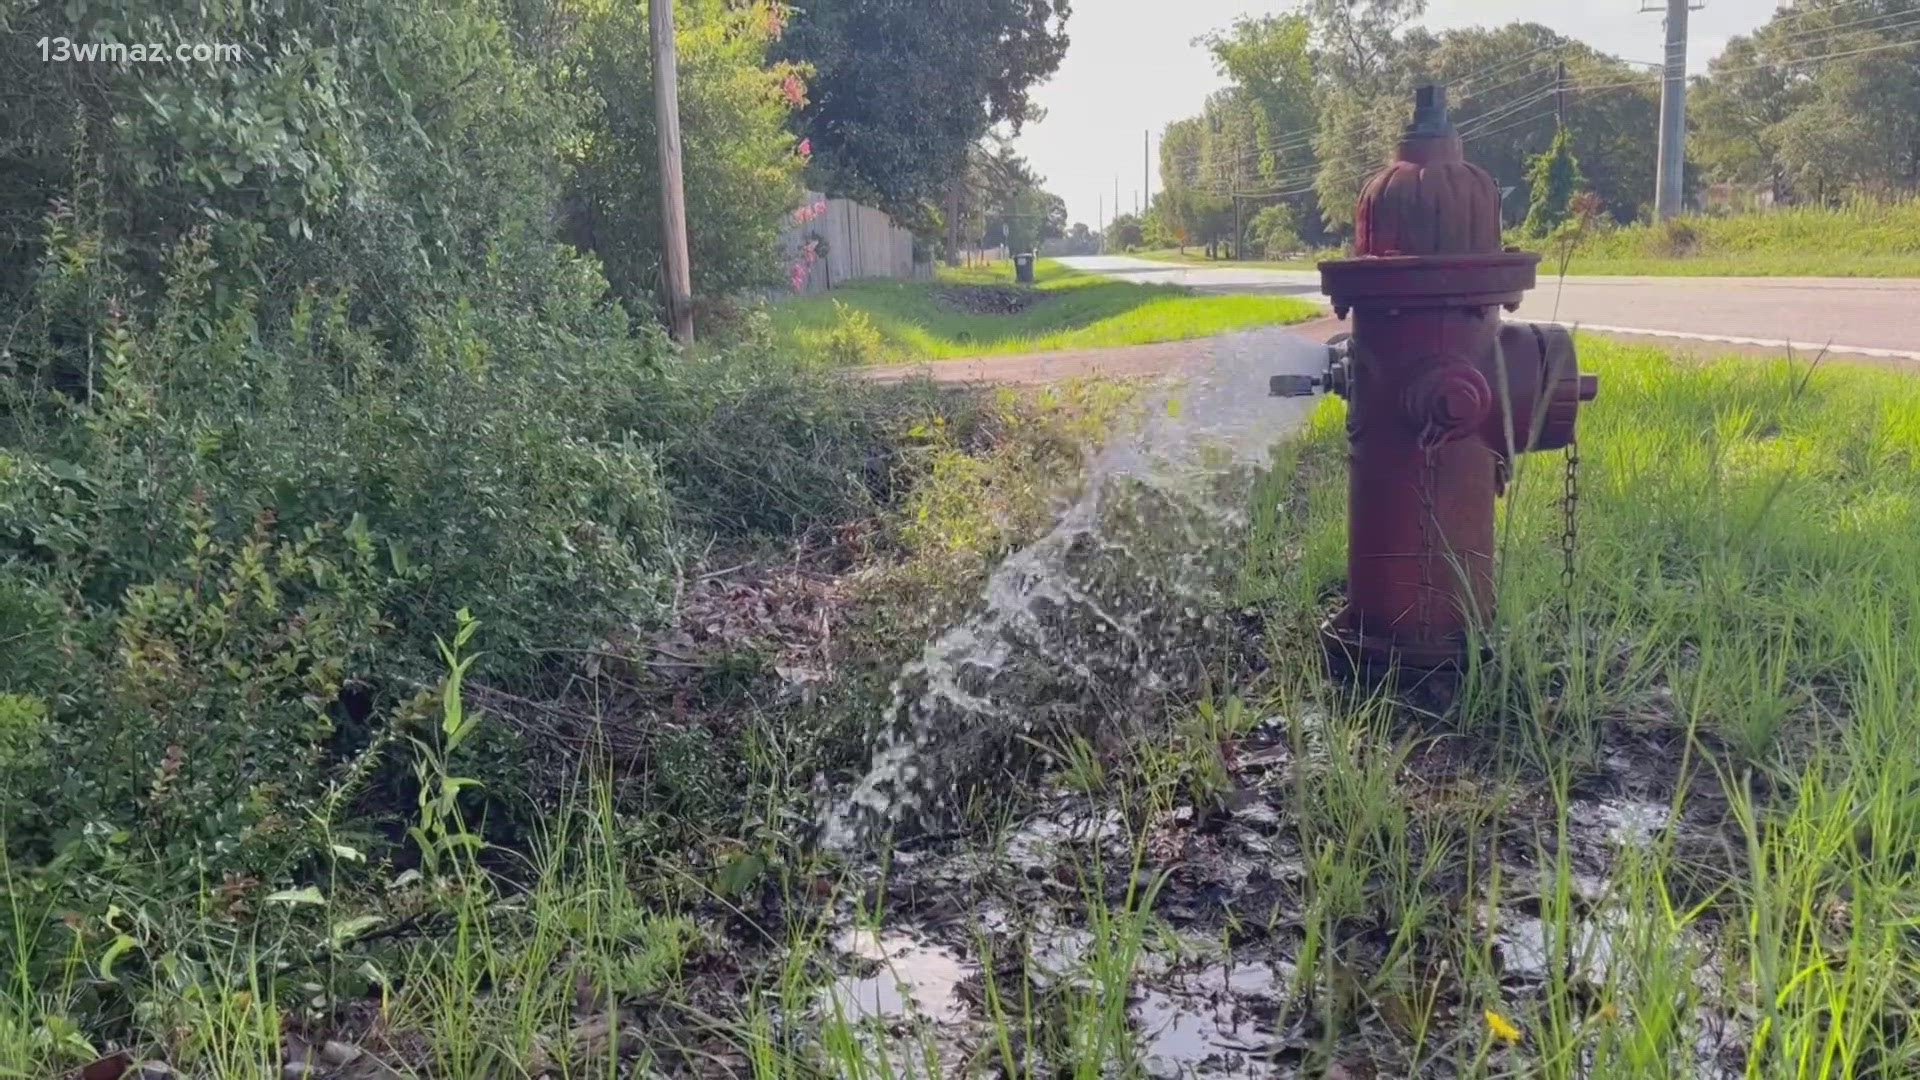 After the inside of a water tower was sandblasted and lined with epoxy, the two fire hydrants in Danville haven't stopped gushing water for weeks.